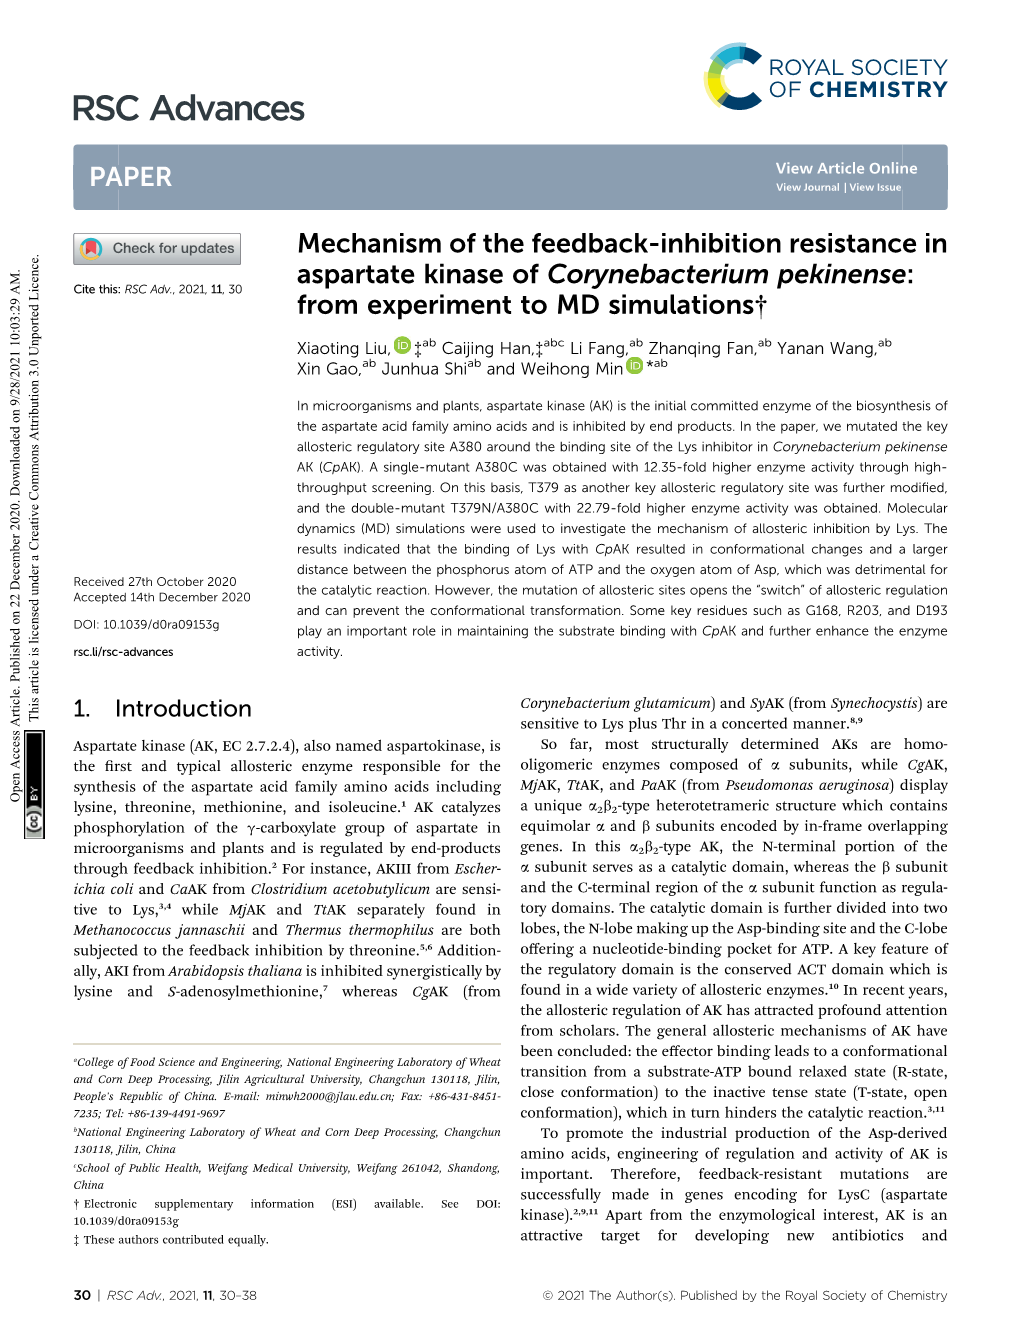 Mechanism of the Feedback-Inhibition Resistance in Aspartate Kinase of Corynebacterium Pekinense: from Experiment to MD Simulati